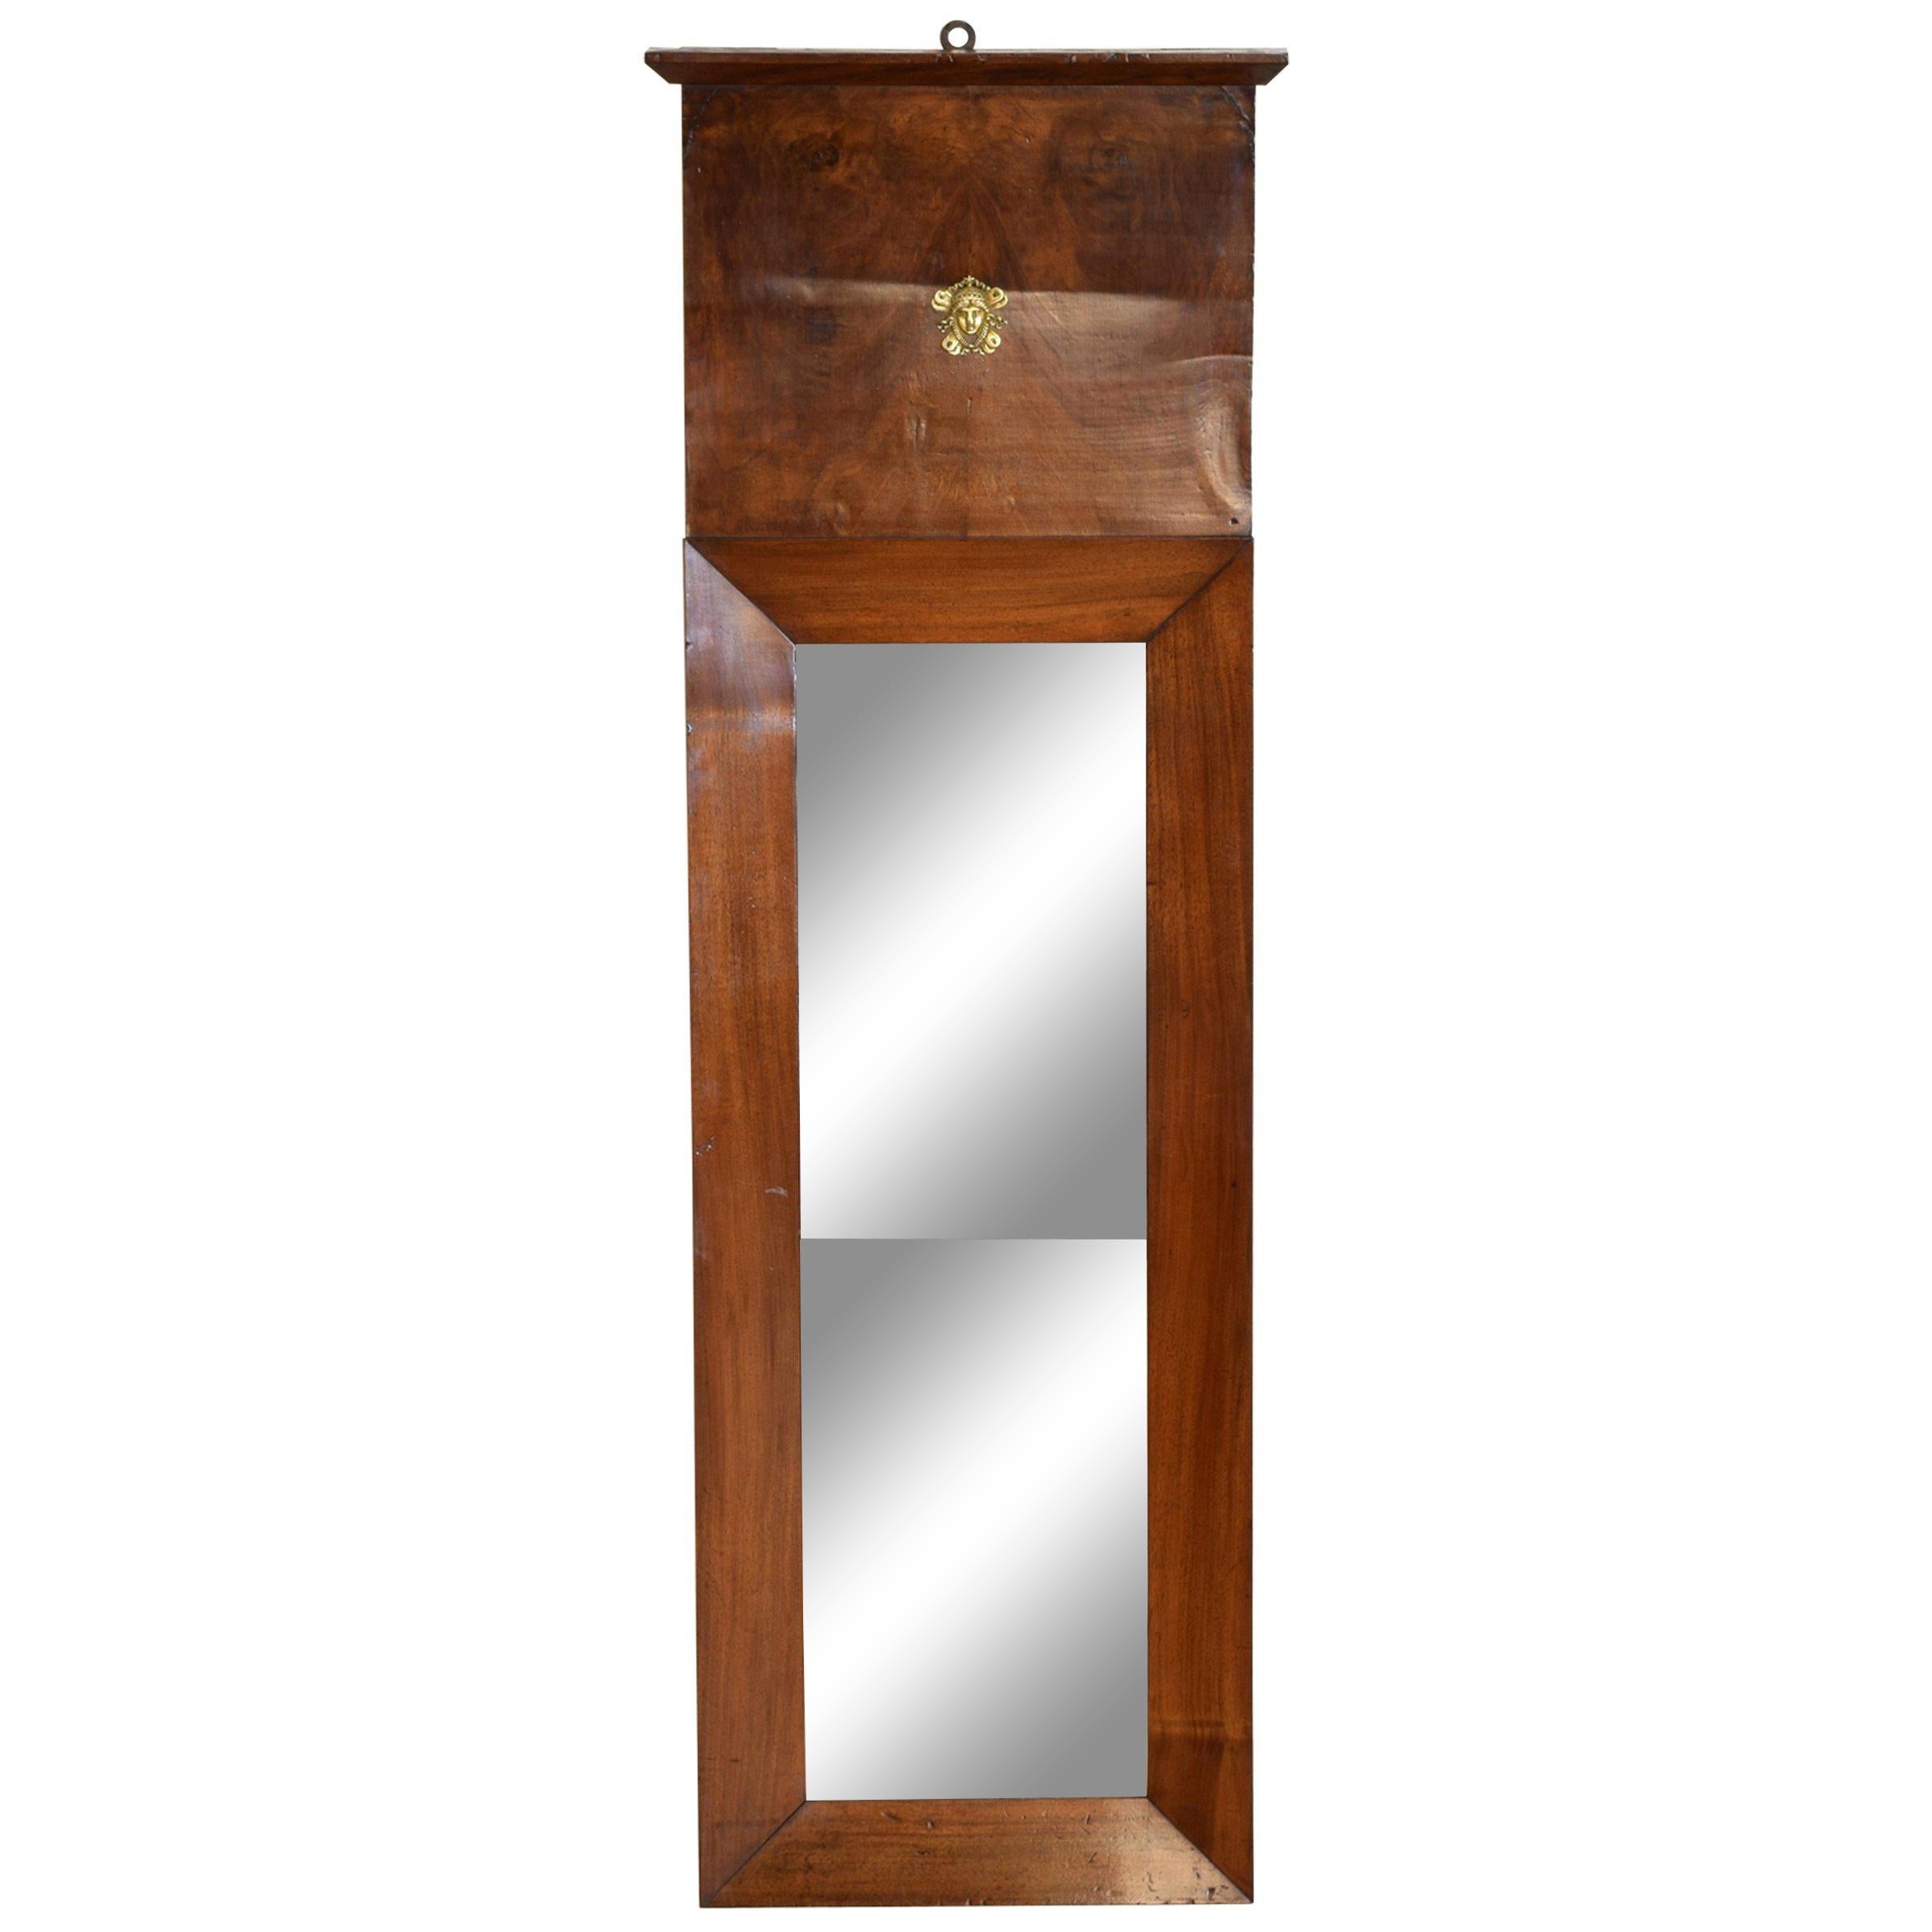 French Neoclassical Tall and Slender Walnut Mirror, circa 1830